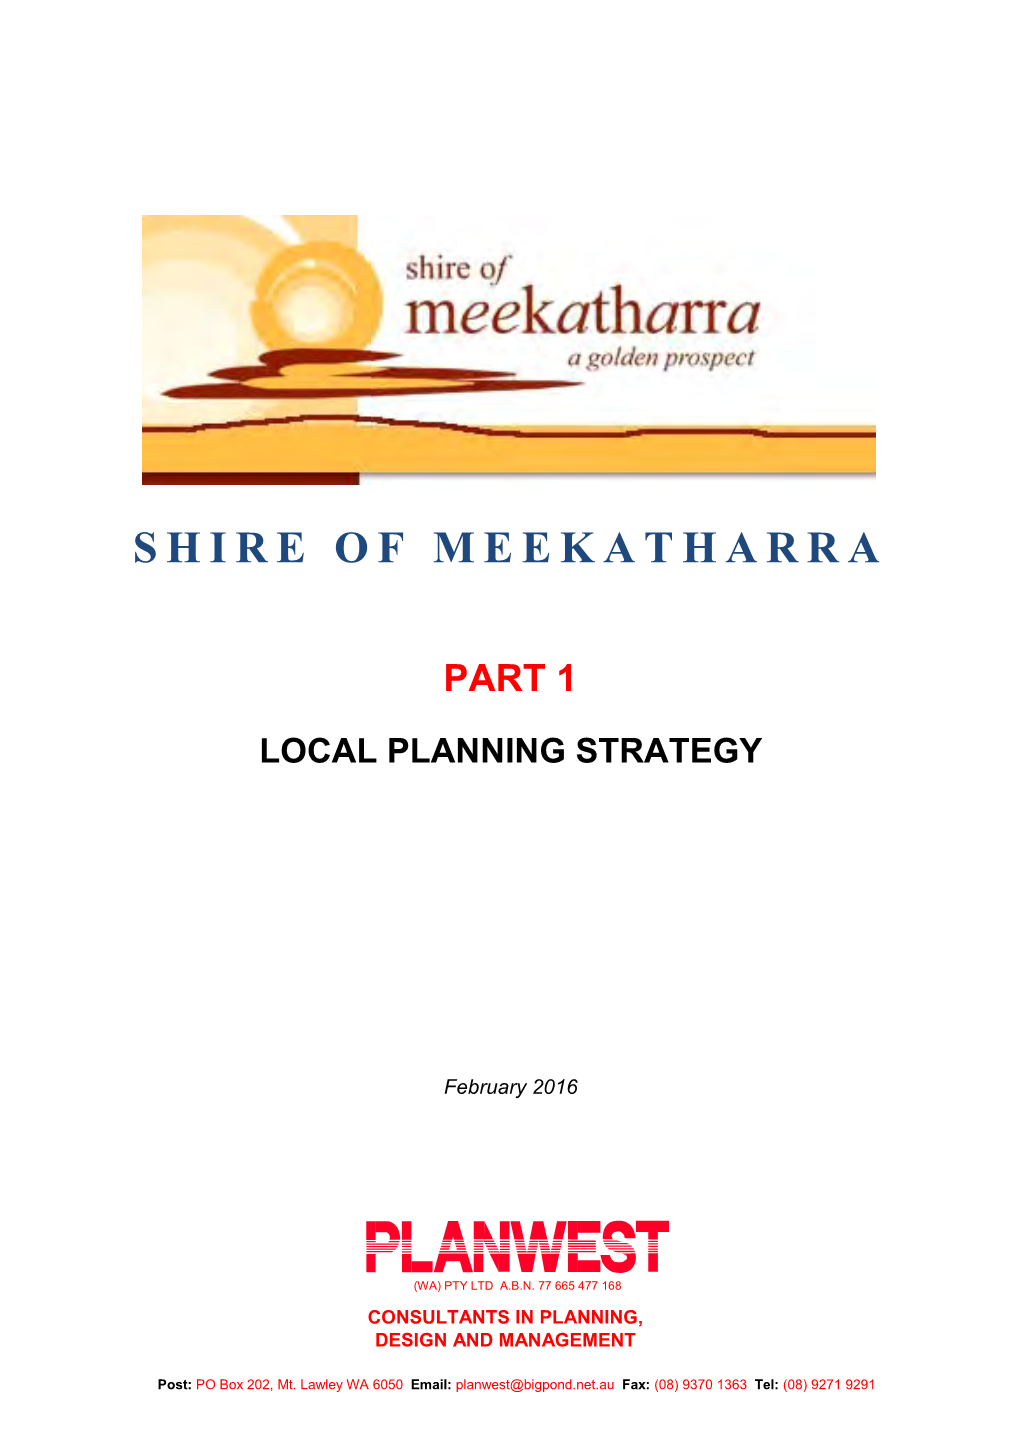 Shire of Meekatharra Part 1 Local Planning Strategy